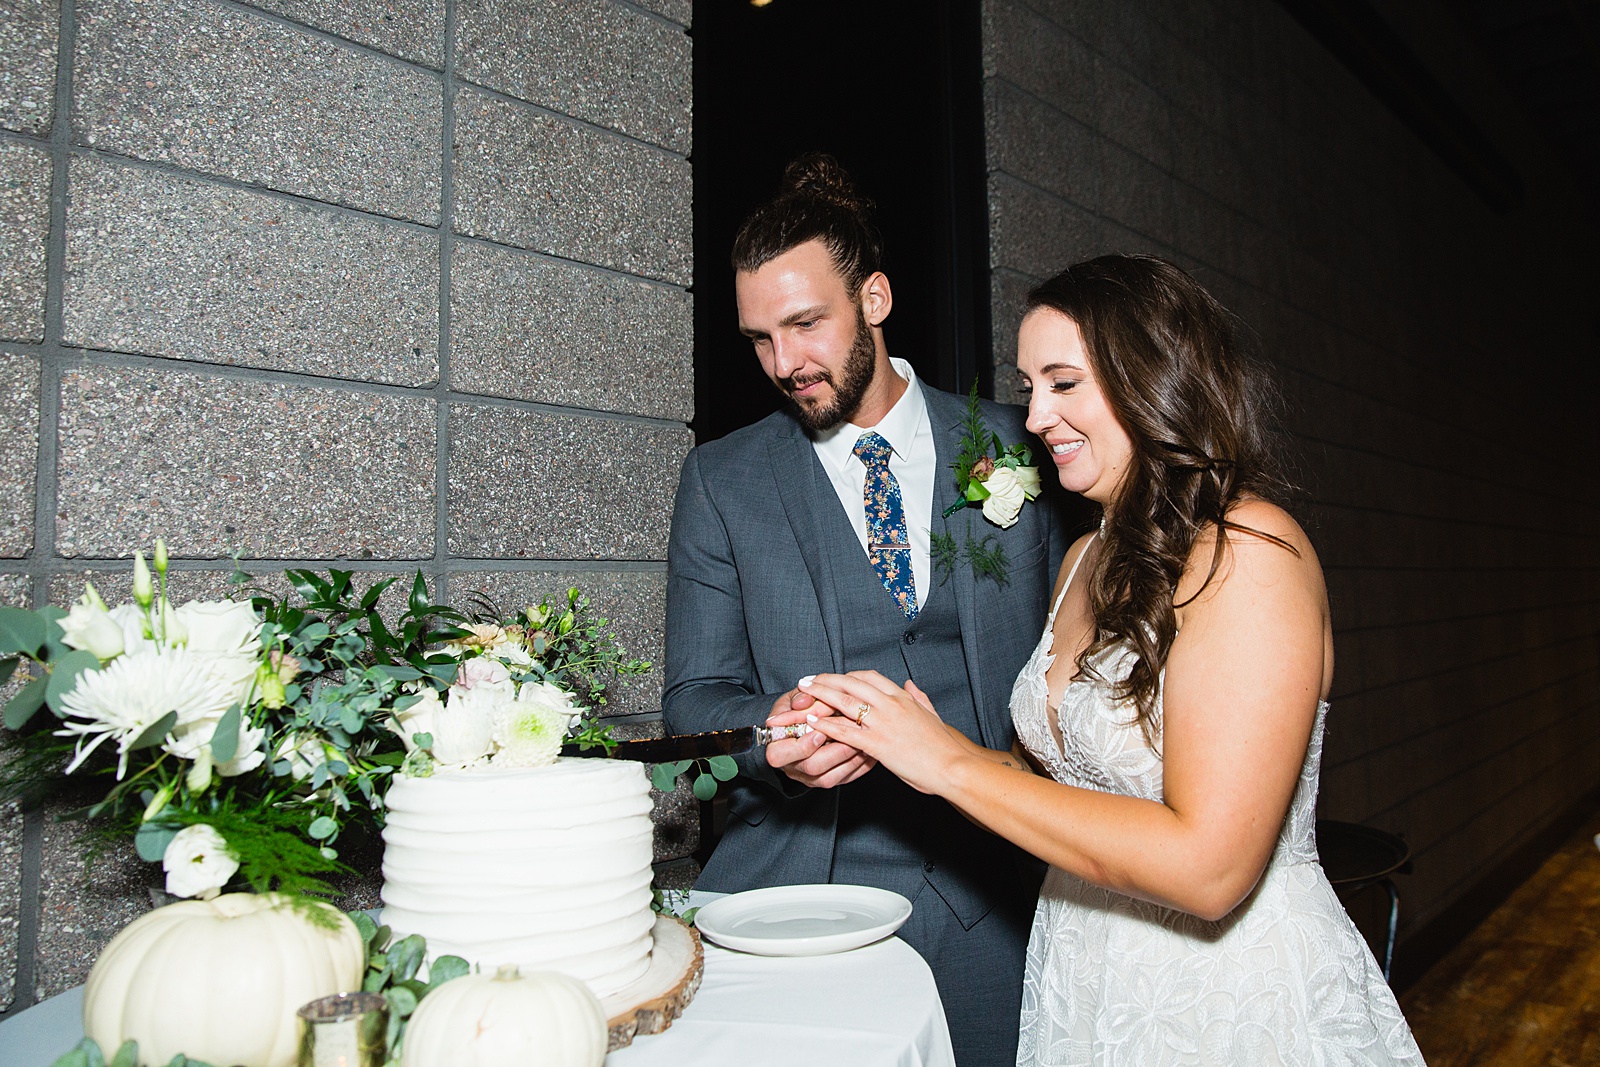 Bride and groom cutting their wedding cake at their Papago Events wedding reception by Arizona wedding photographer PMA Photography.